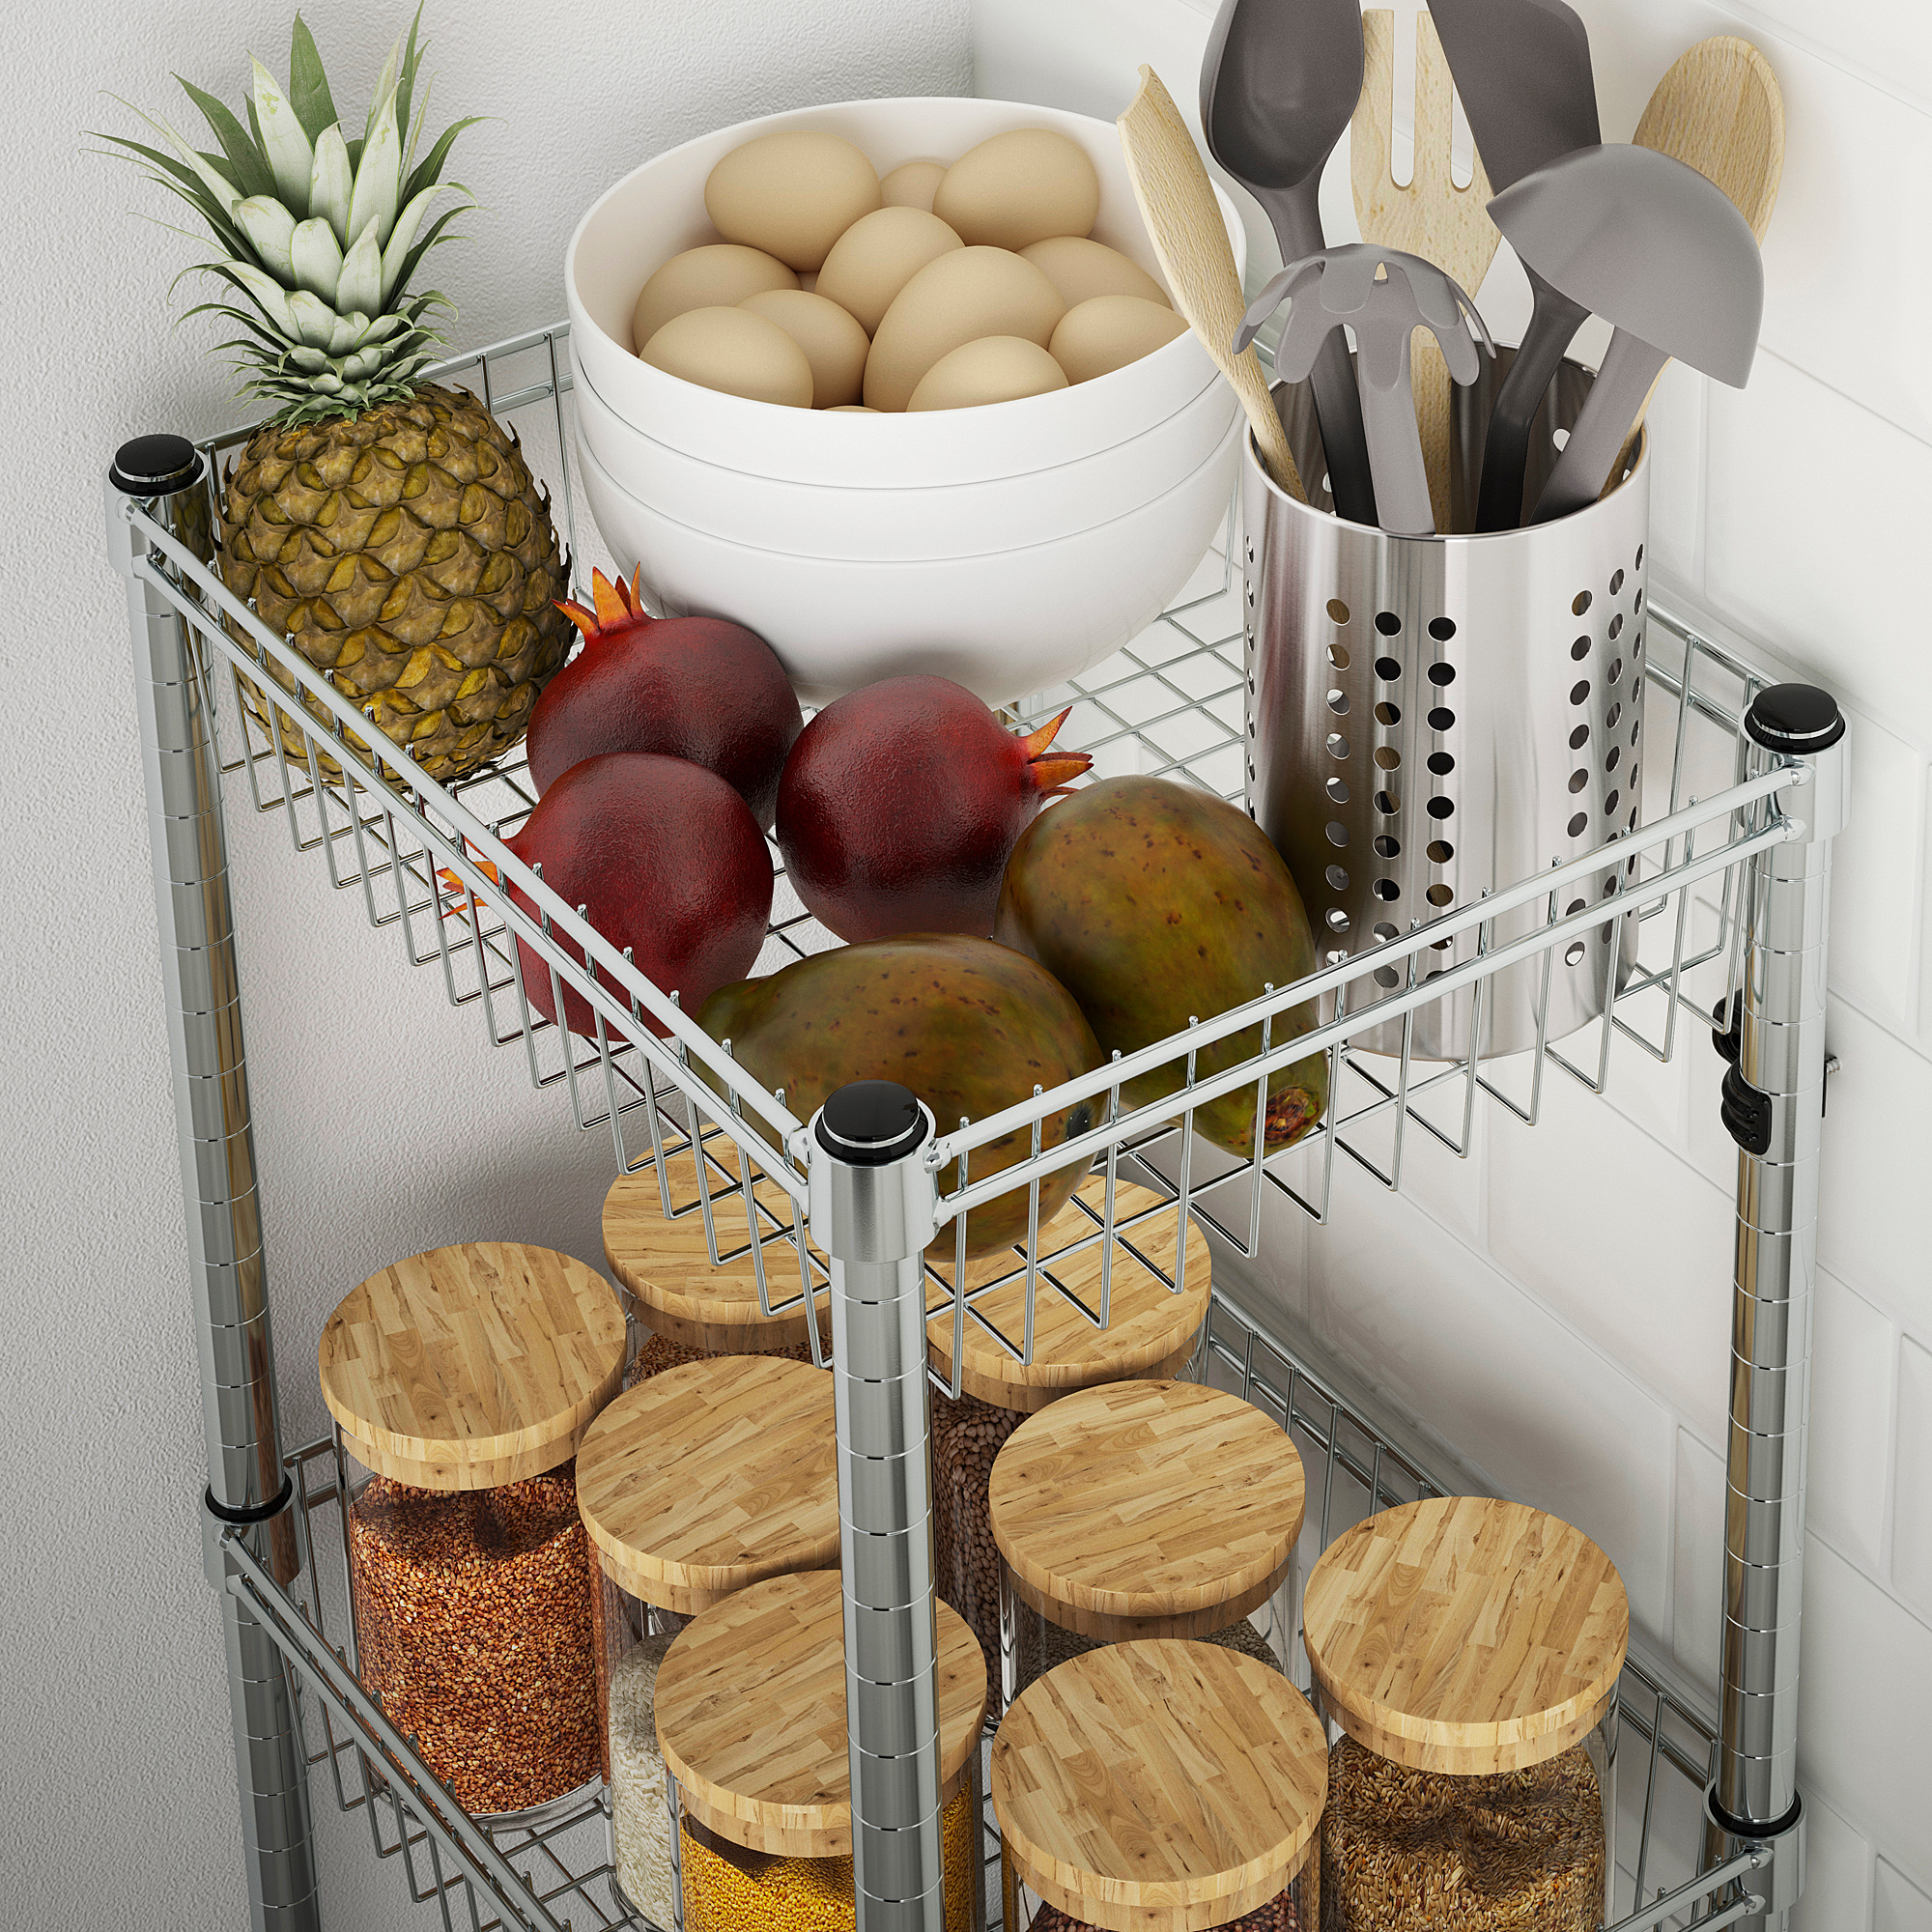 OMAR shelving unit with 3 baskets